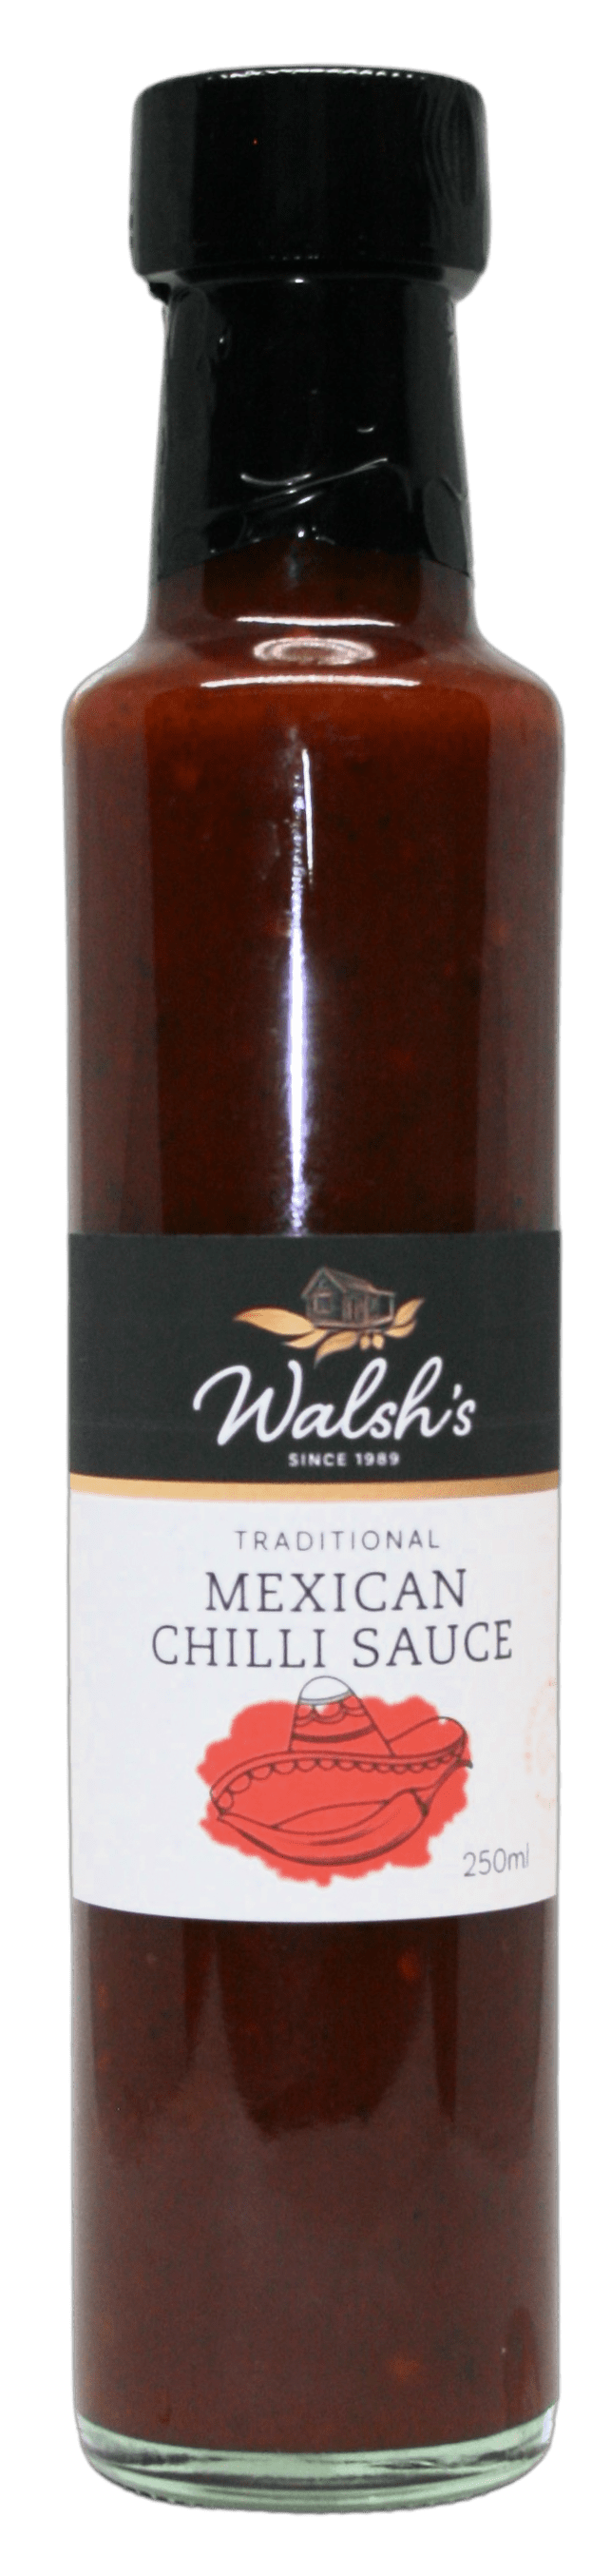 Walshs Mexican Chilli Sauce